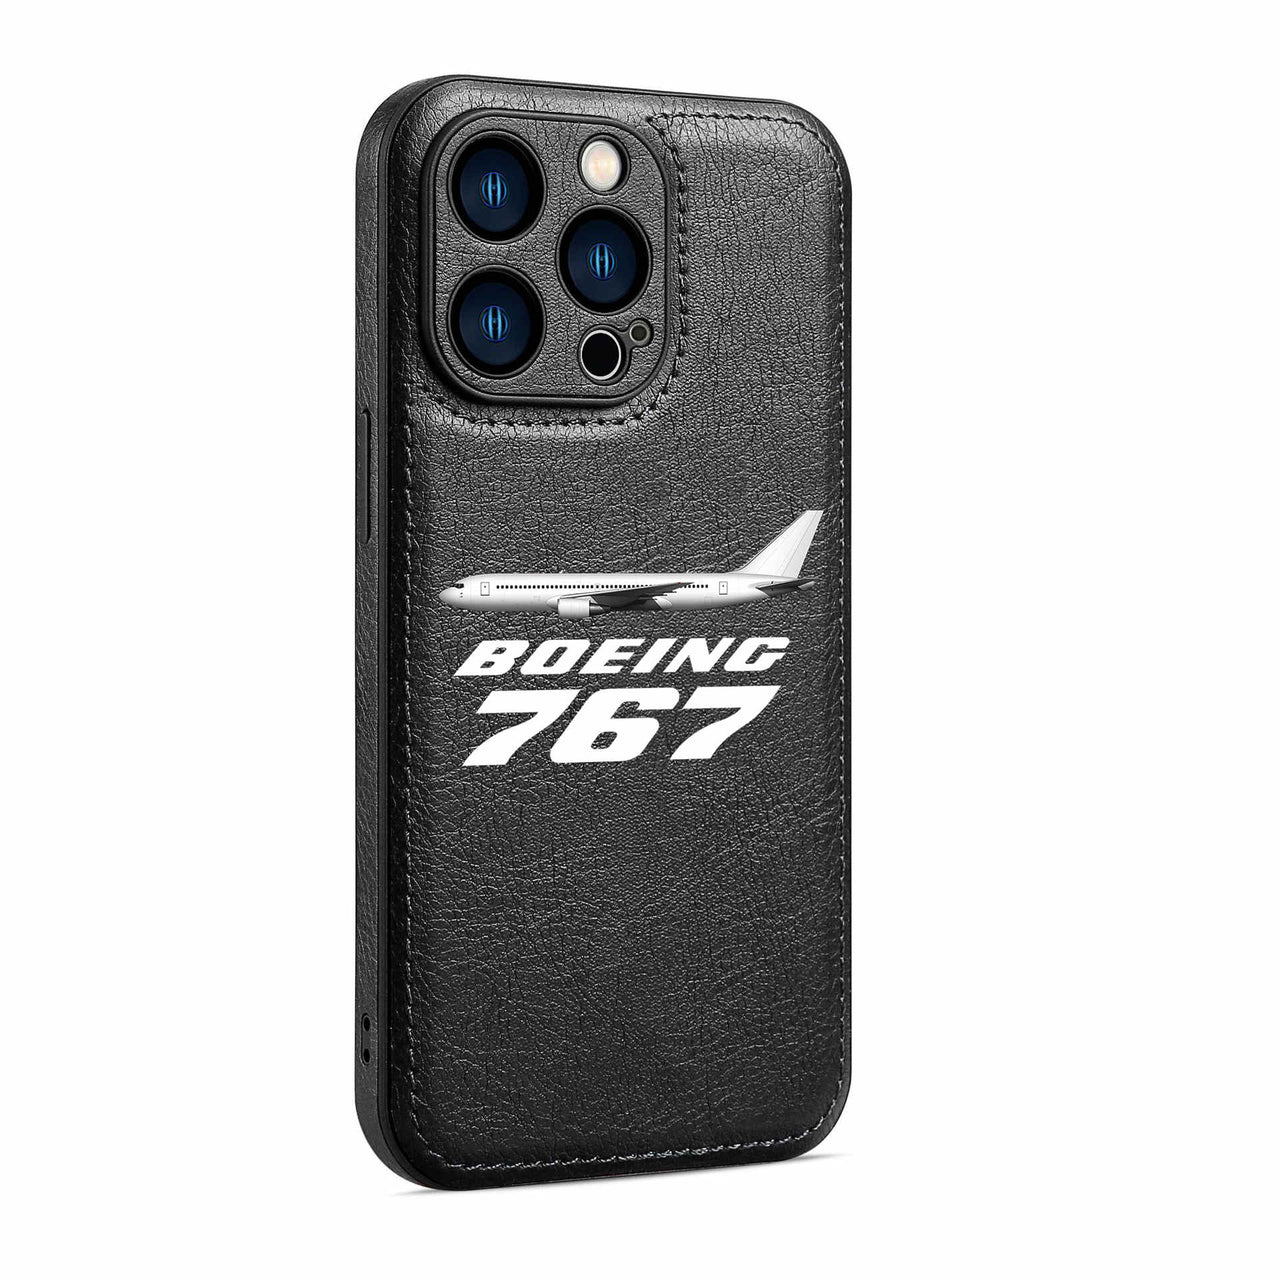 The Boeing 767 Designed Leather iPhone Cases